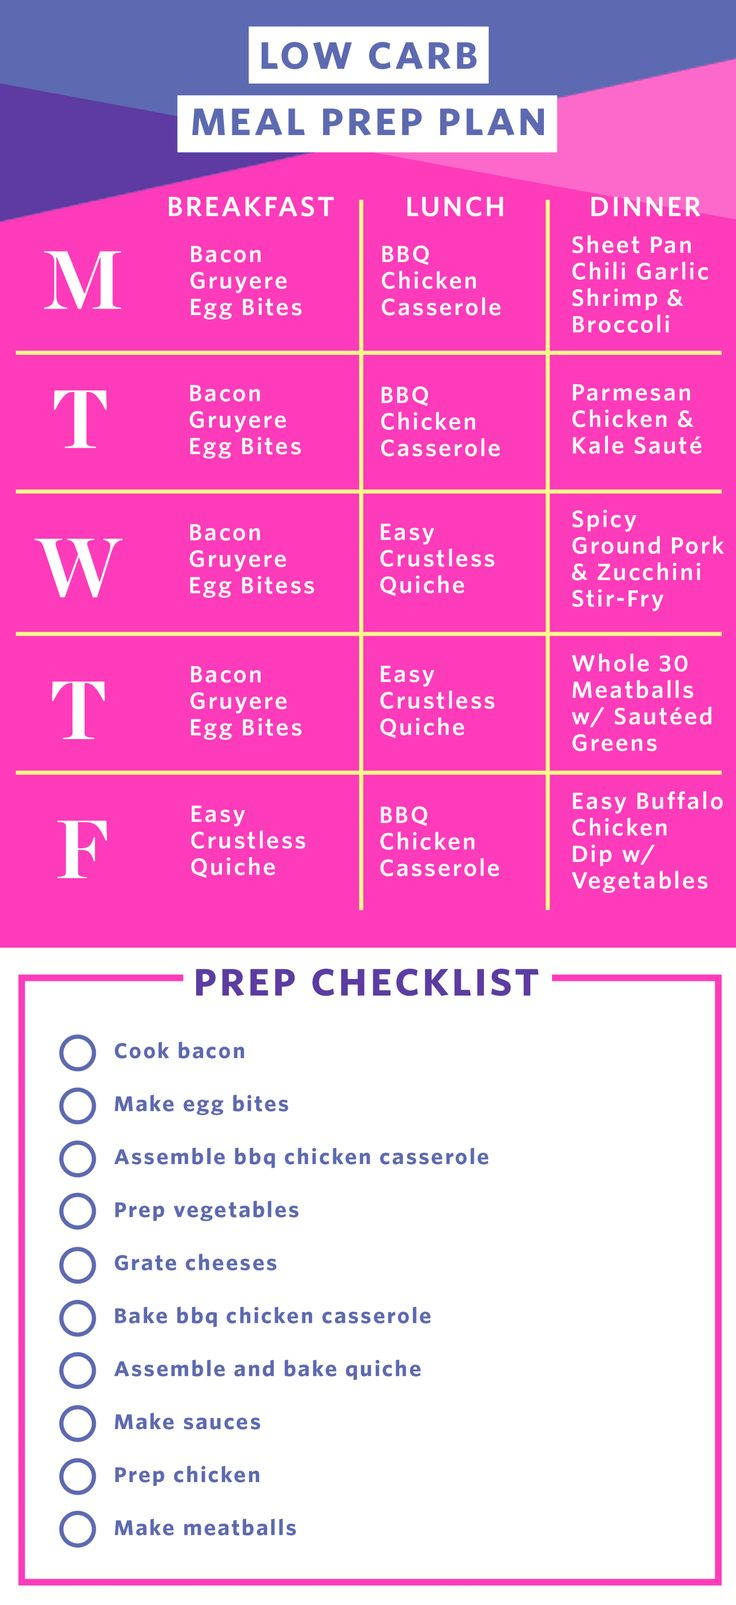 Meal Prep Plan How I Prep A Week Of Low Carb Meals In 